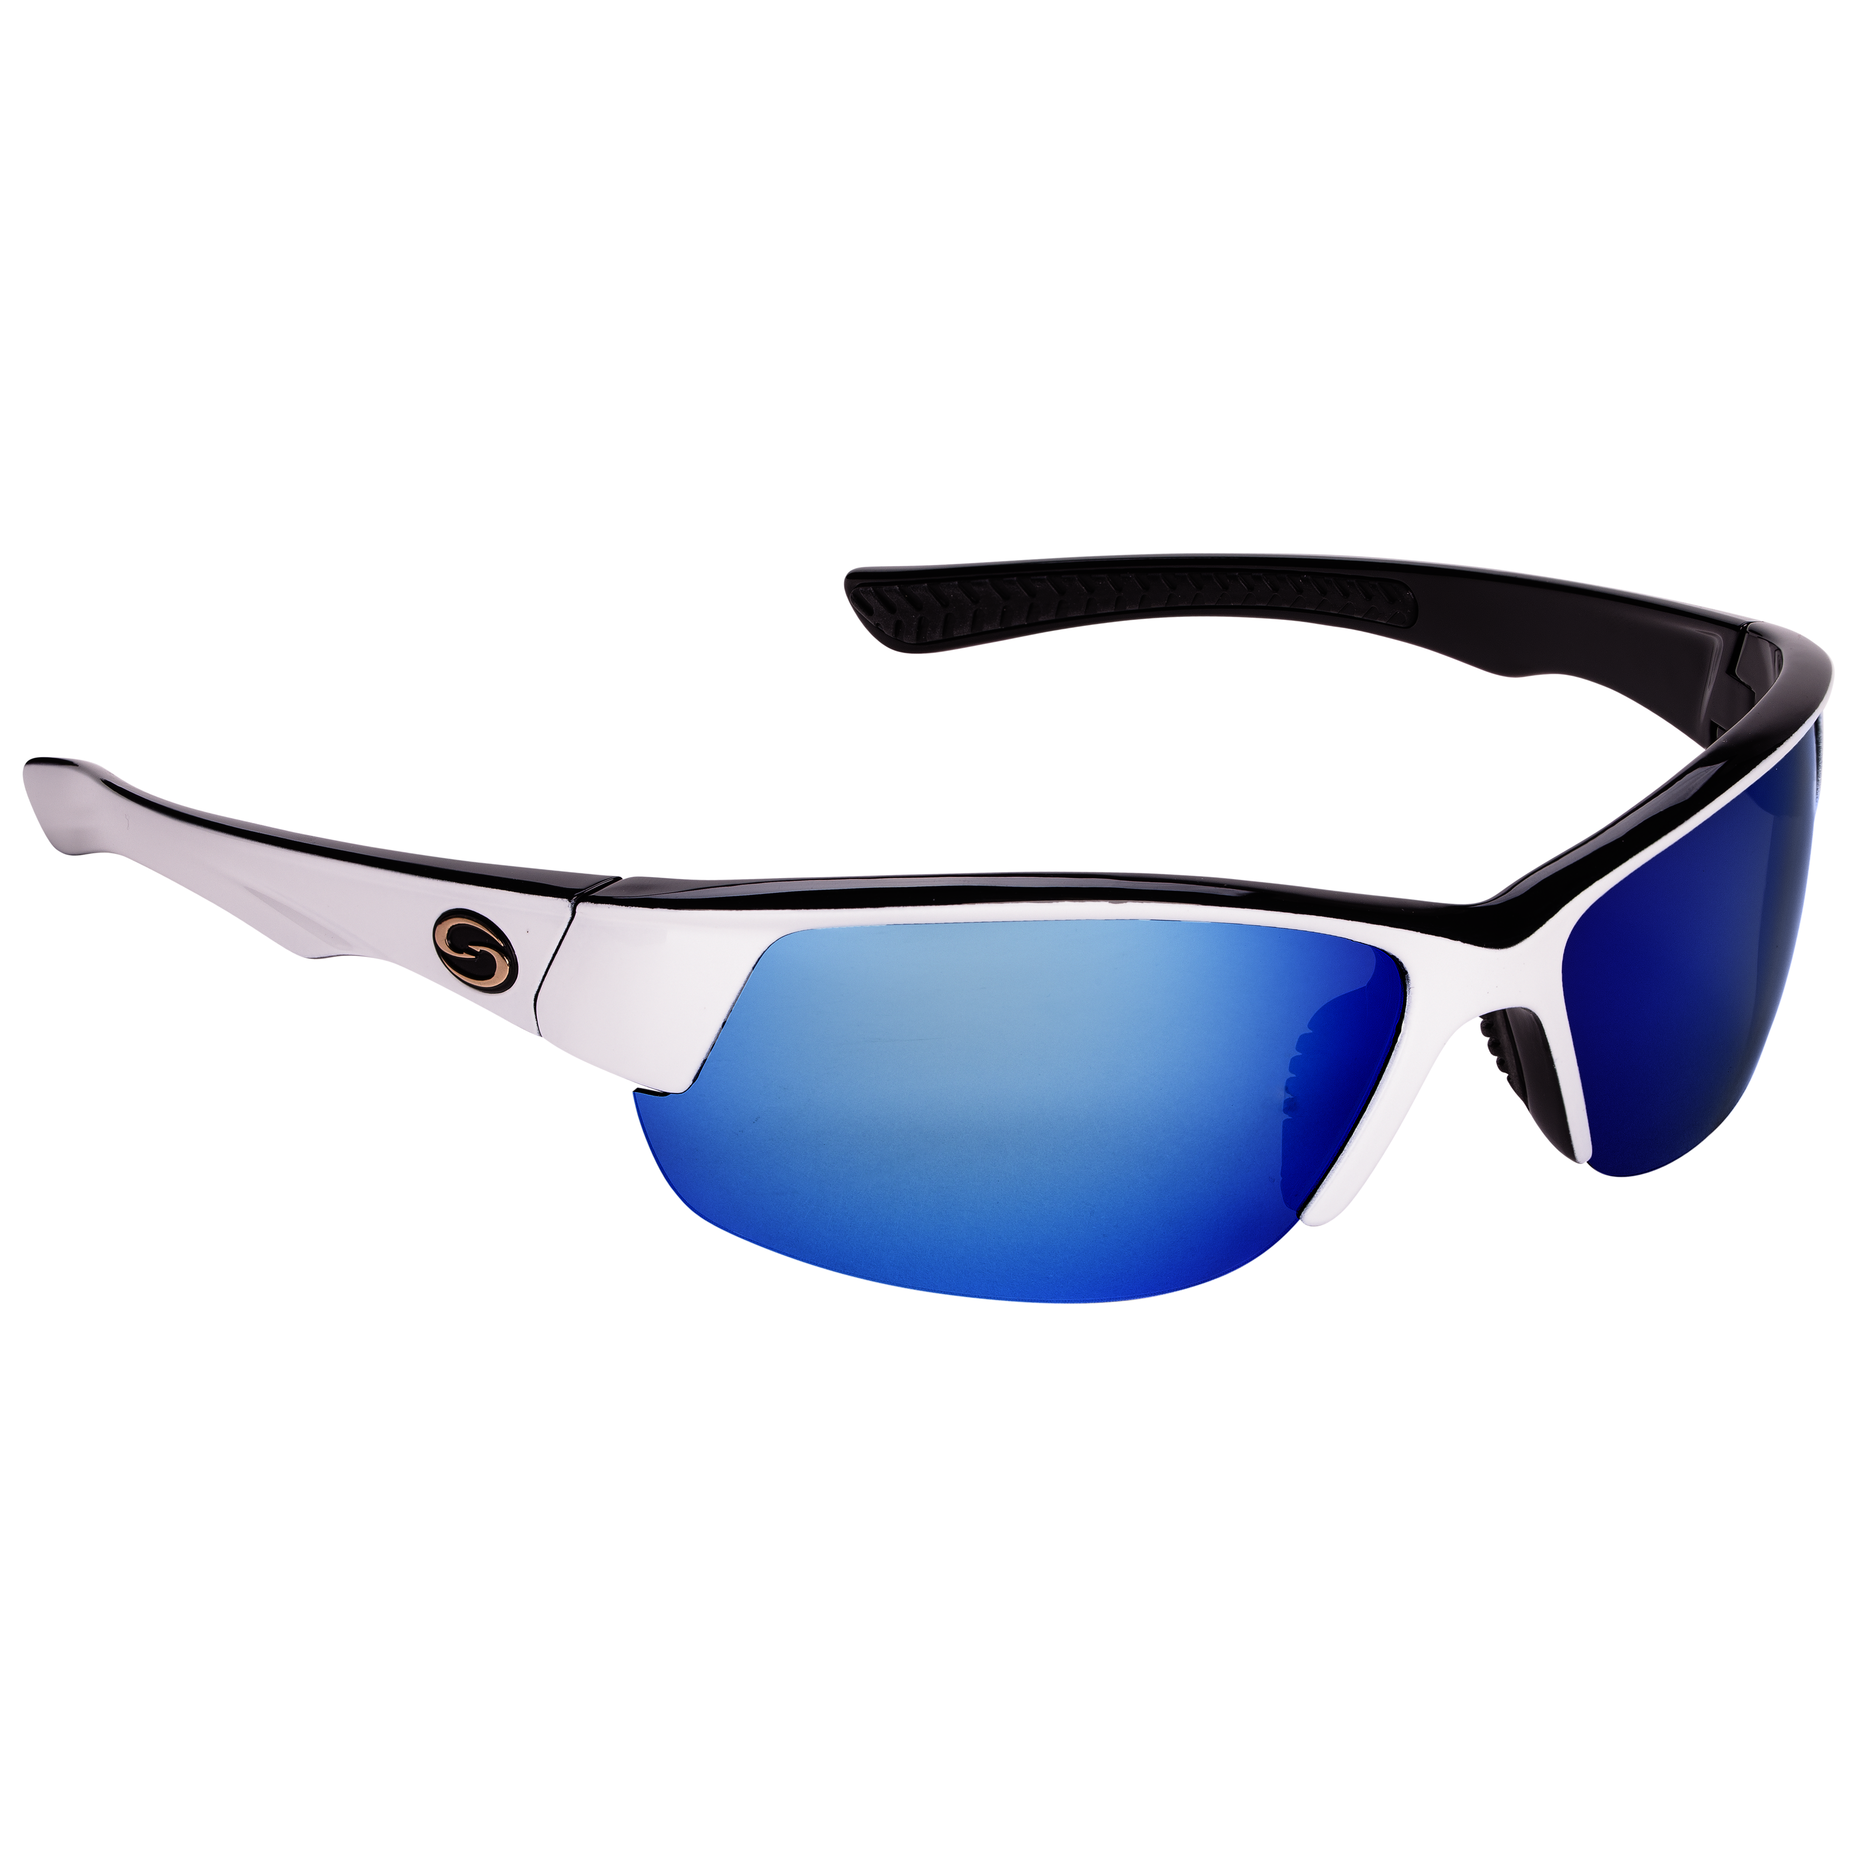 Strike King S11 Optics Brazos with Matte Black Frame and Blue Lenses for  Sale, Online Clothing Store